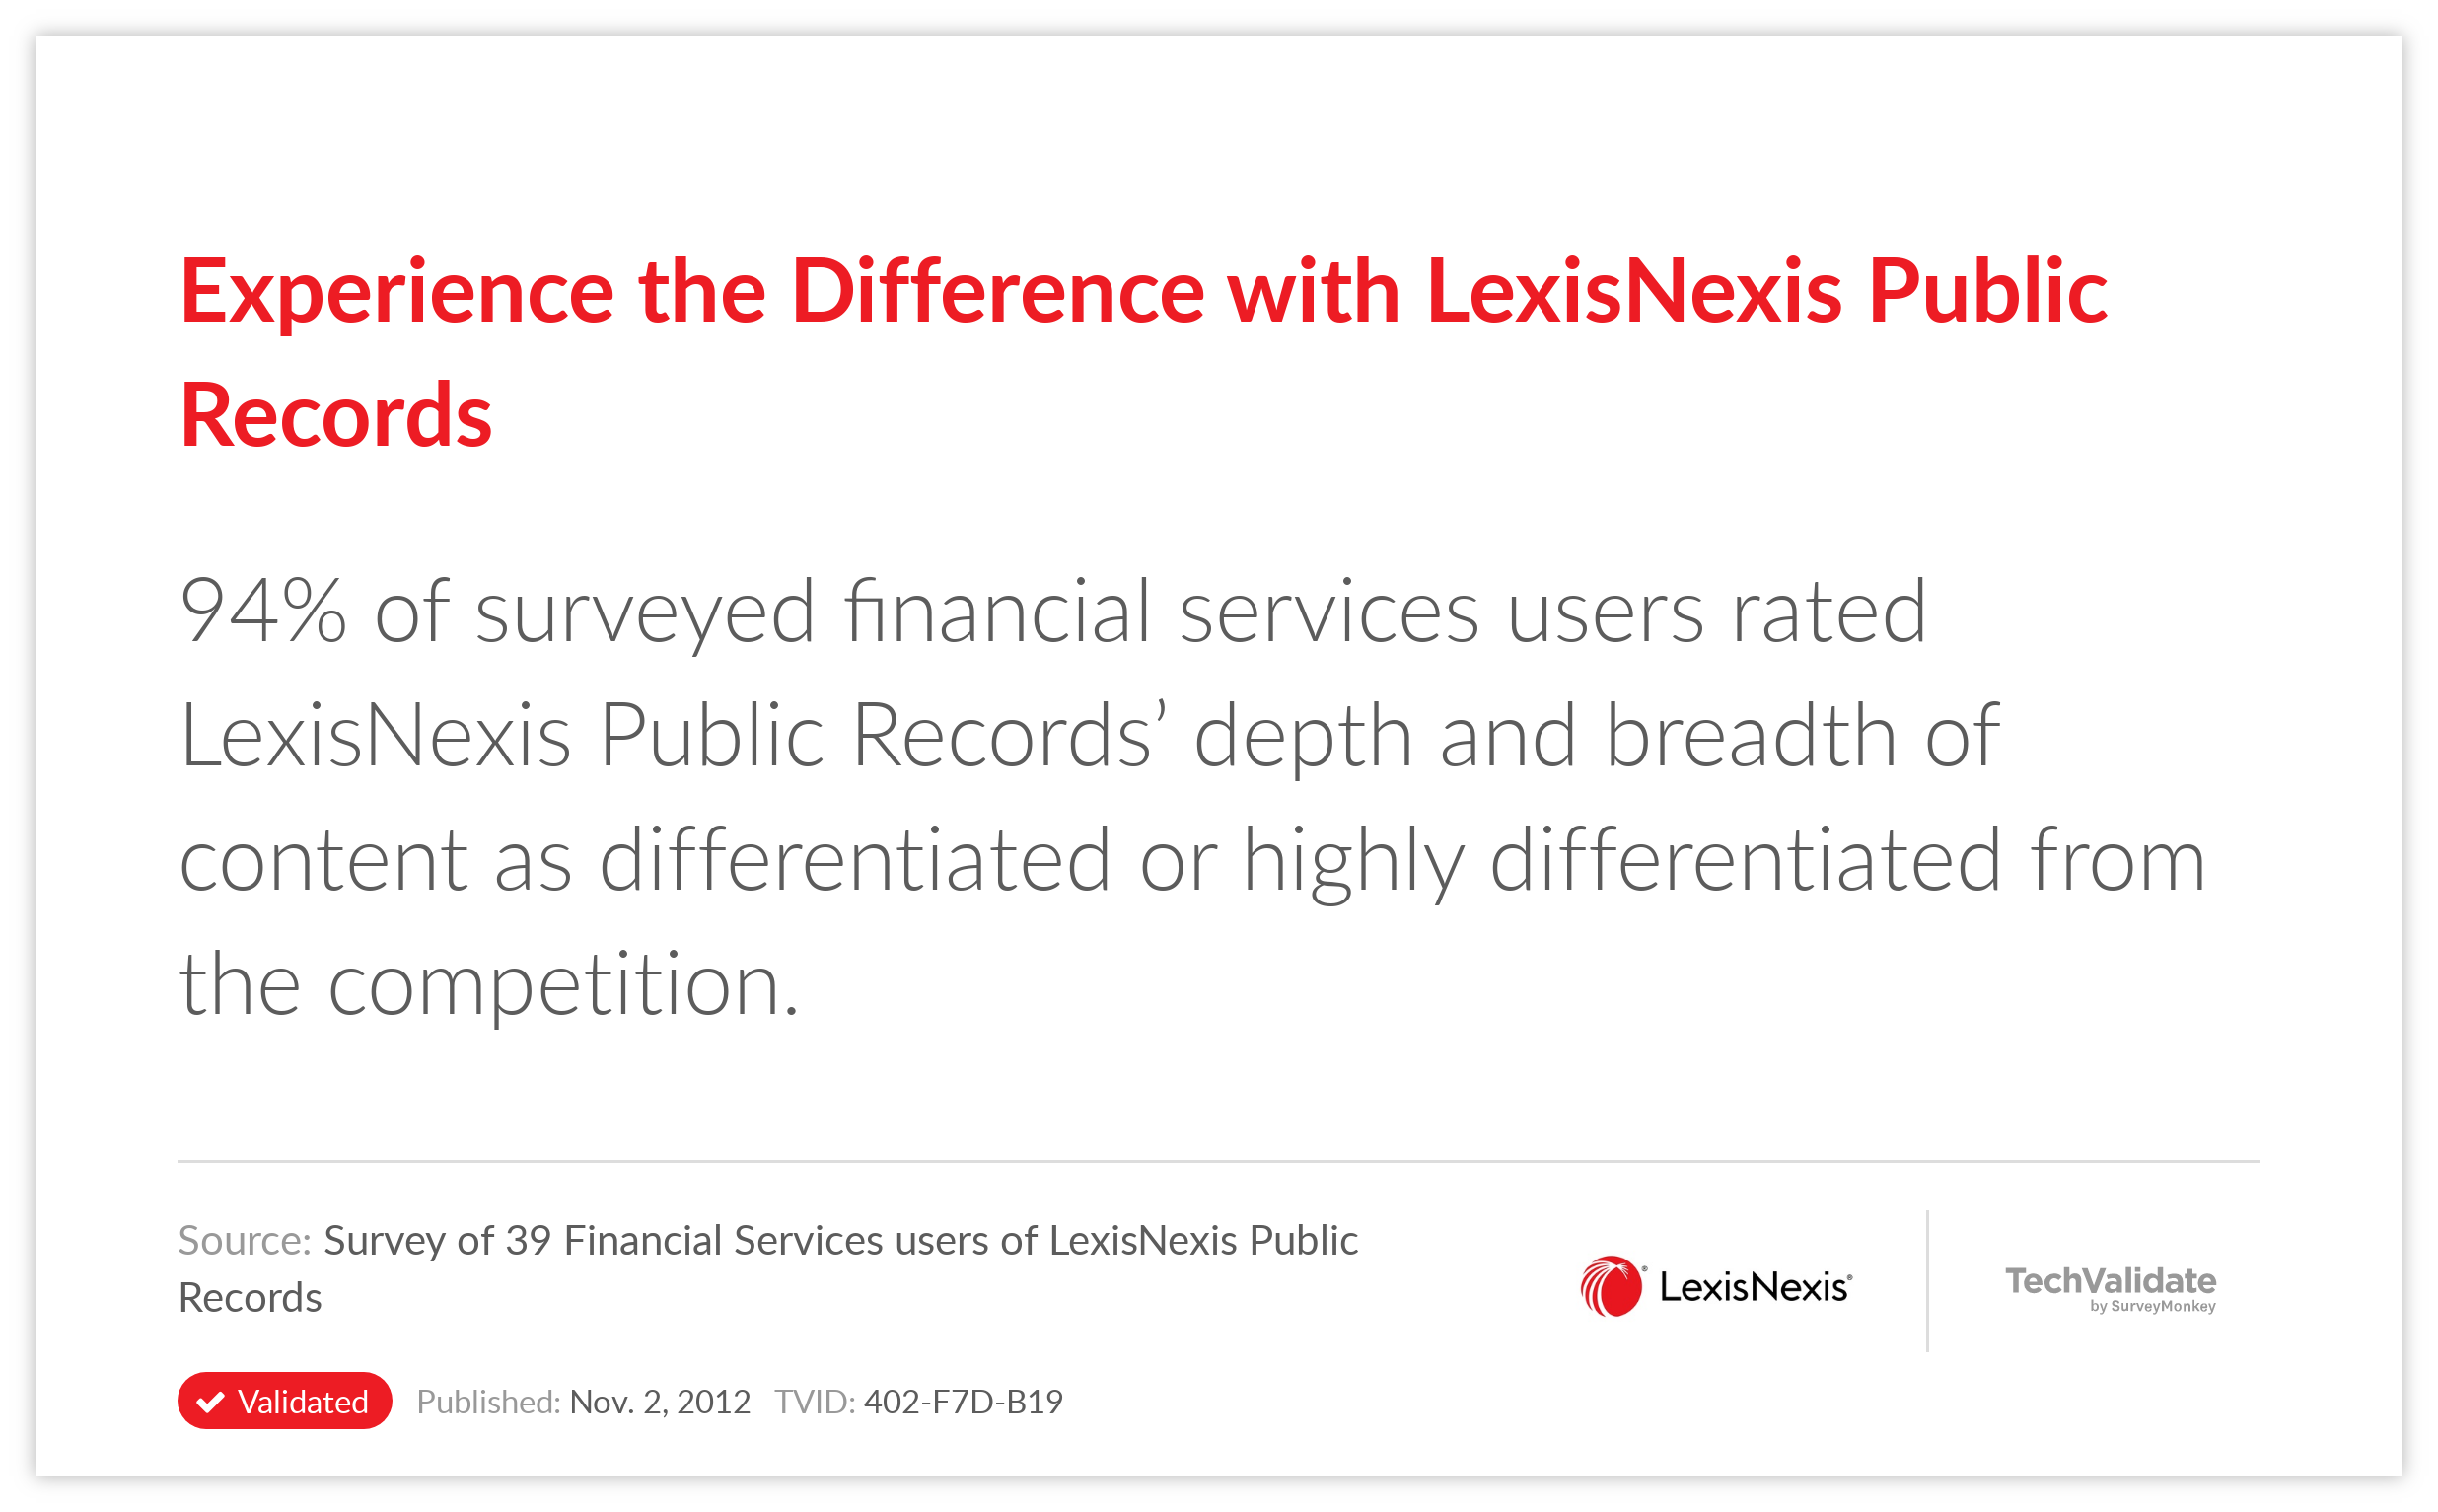 Experience the Difference with LexisNexis Public Records